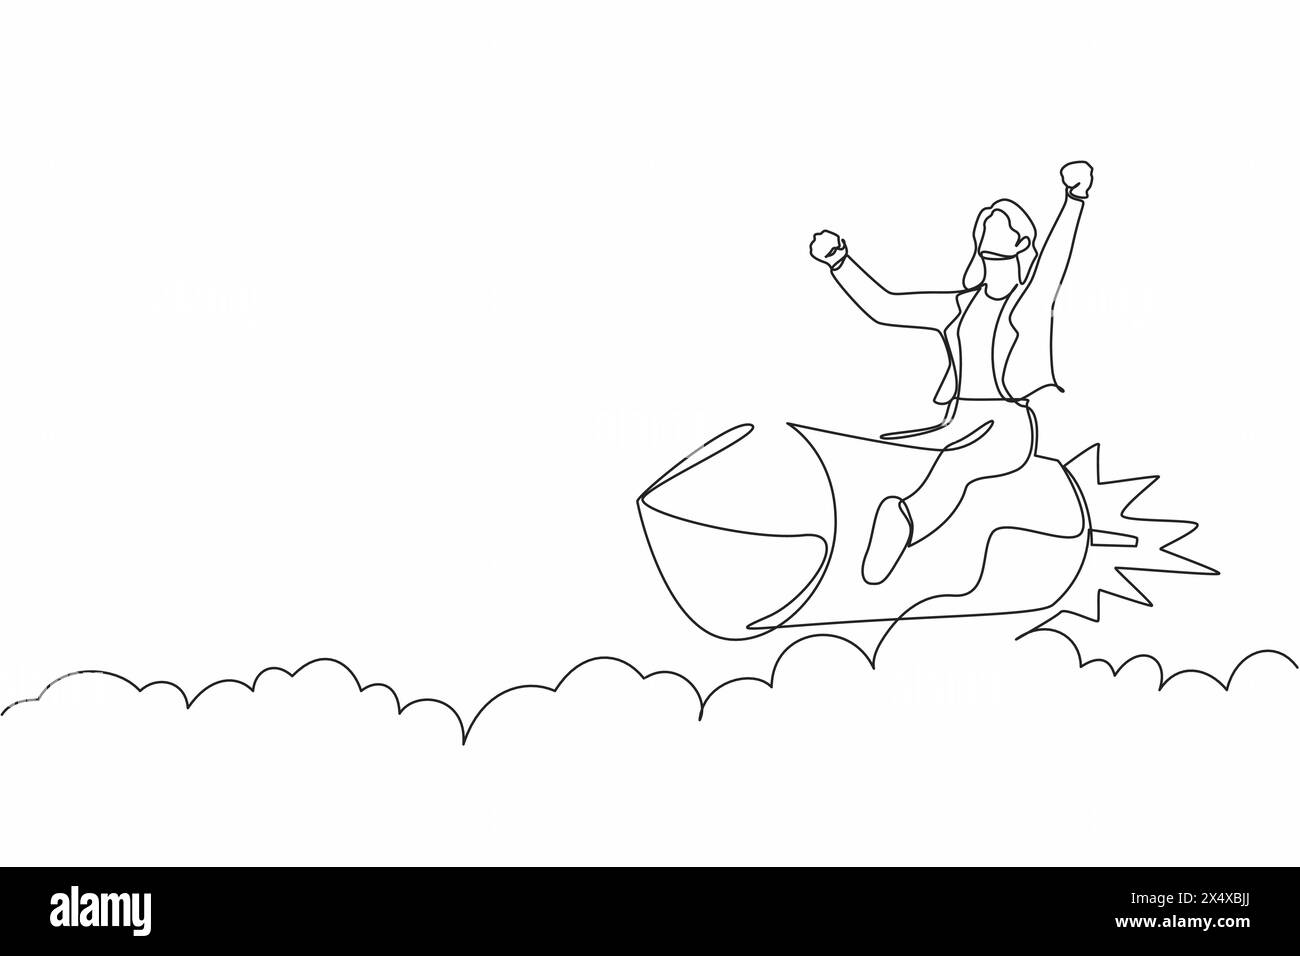 Single continuous line drawing businesswoman riding a rocket through the sky, concept for business success or innovation. Minimalist metaphor. Dynamic Stock Vector